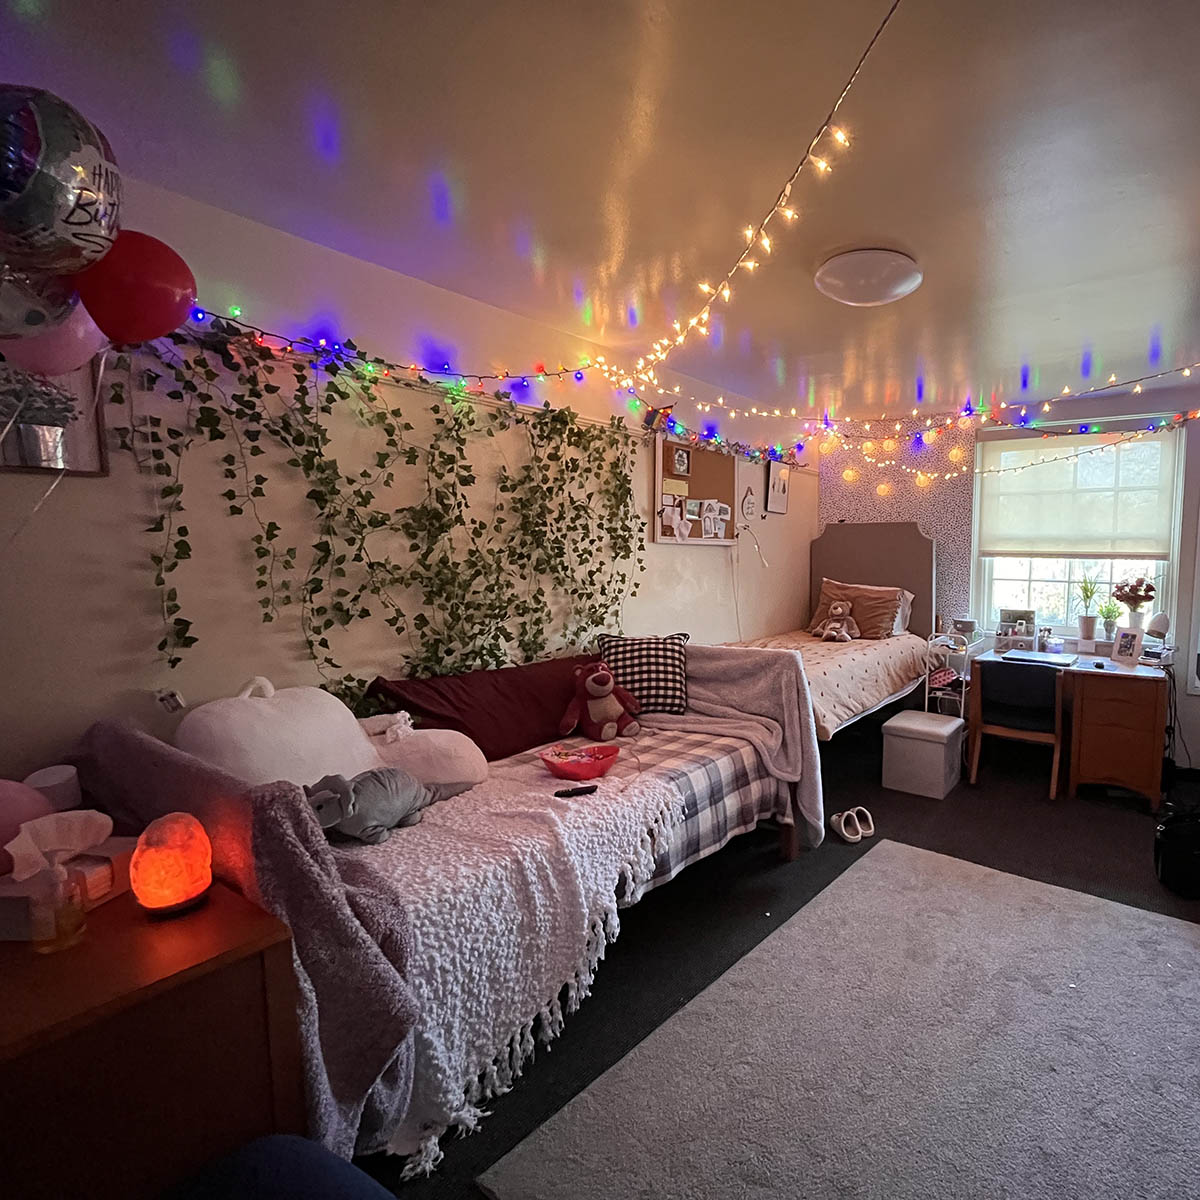 Photo of a decorated dorm room with cozy pillows and blankets and fairy lights